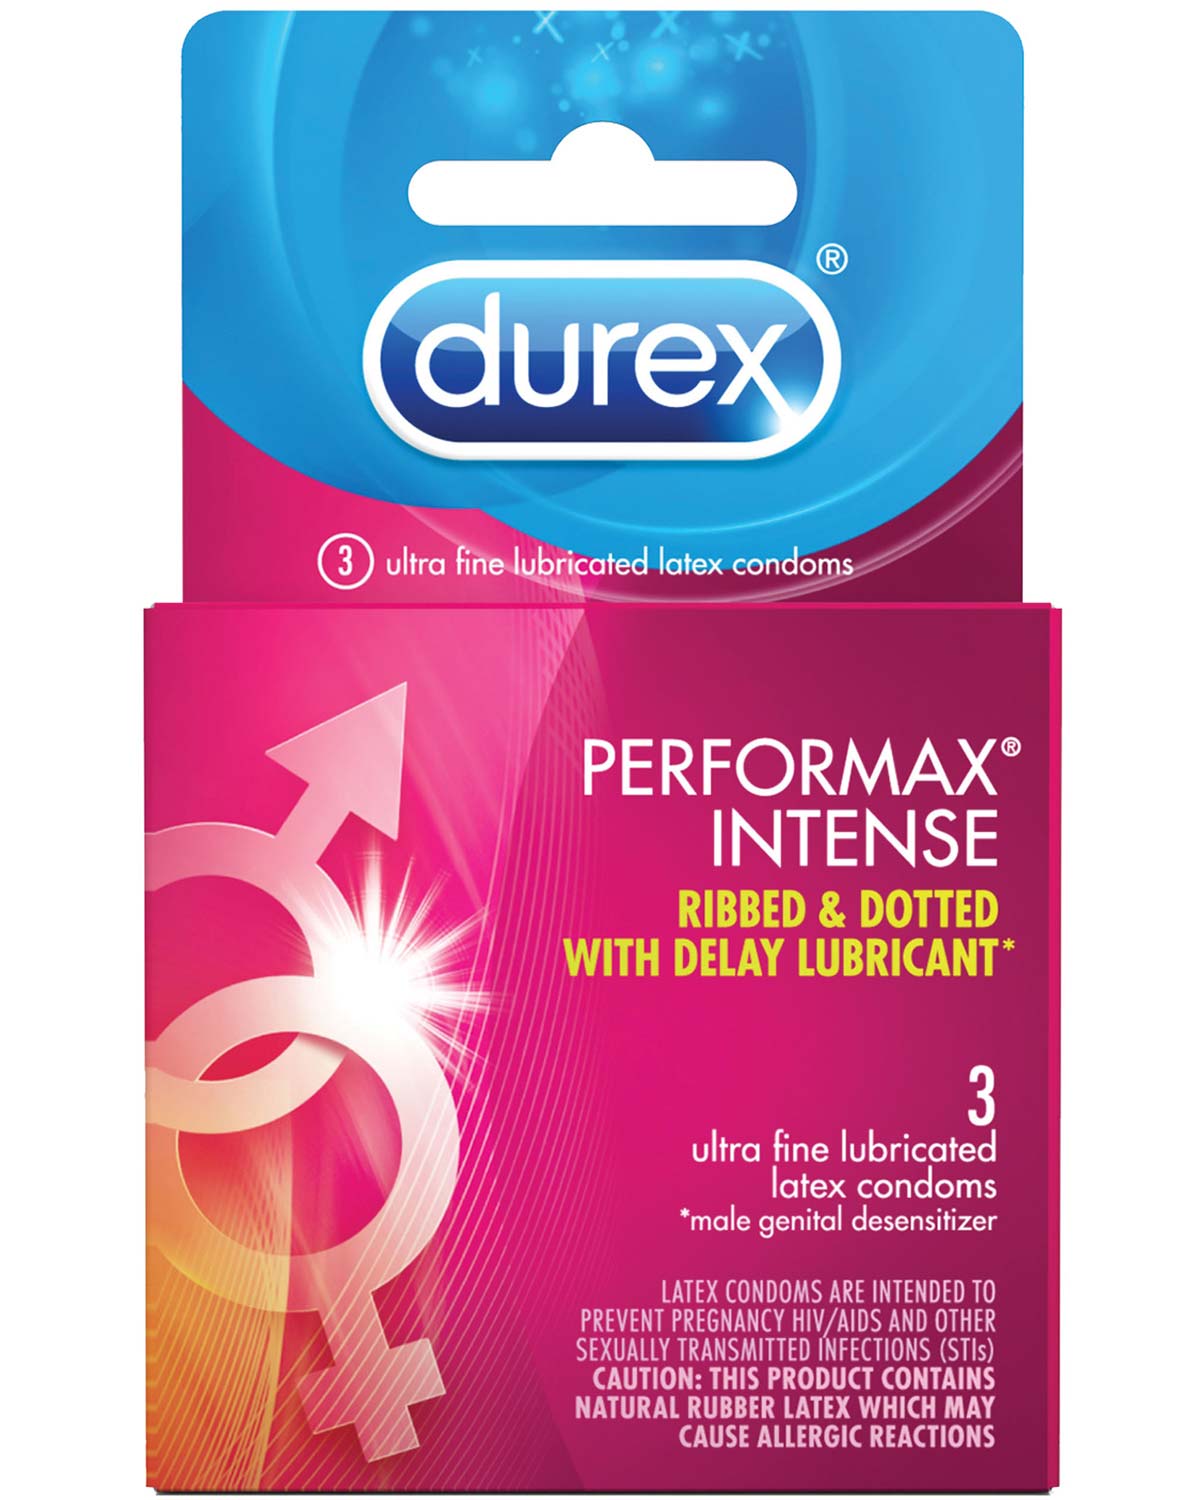 Performax Intense is a textured condom that is ribbed... 